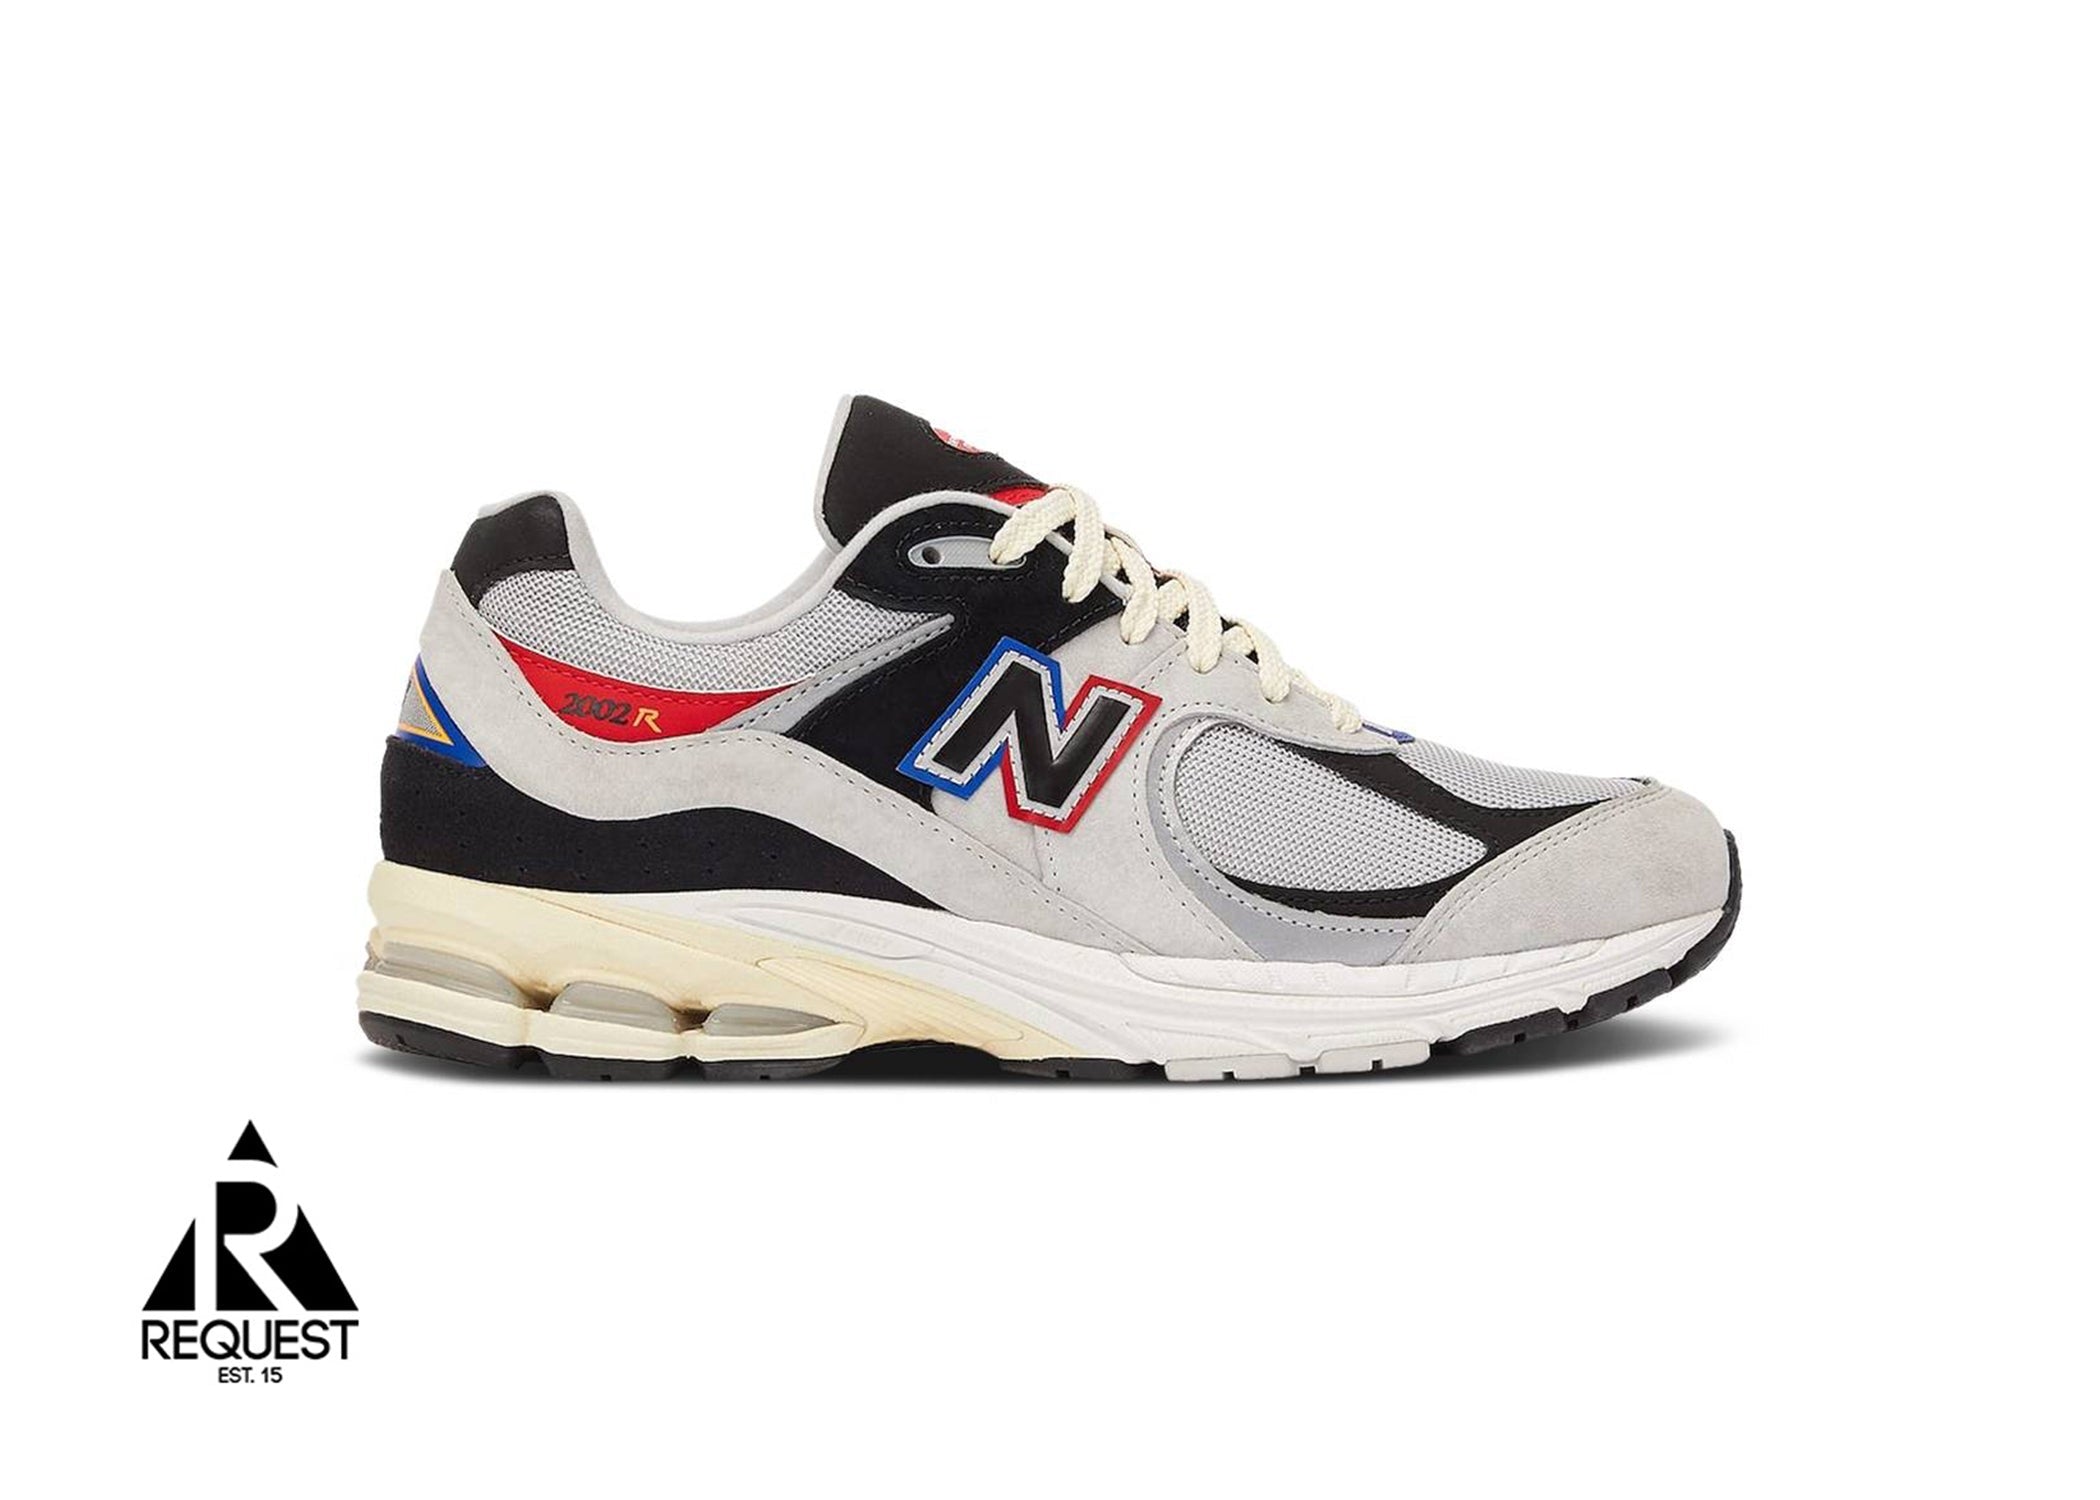 New Balance 2002R "DTLR" "Virginia Is For Lovers" (GS)